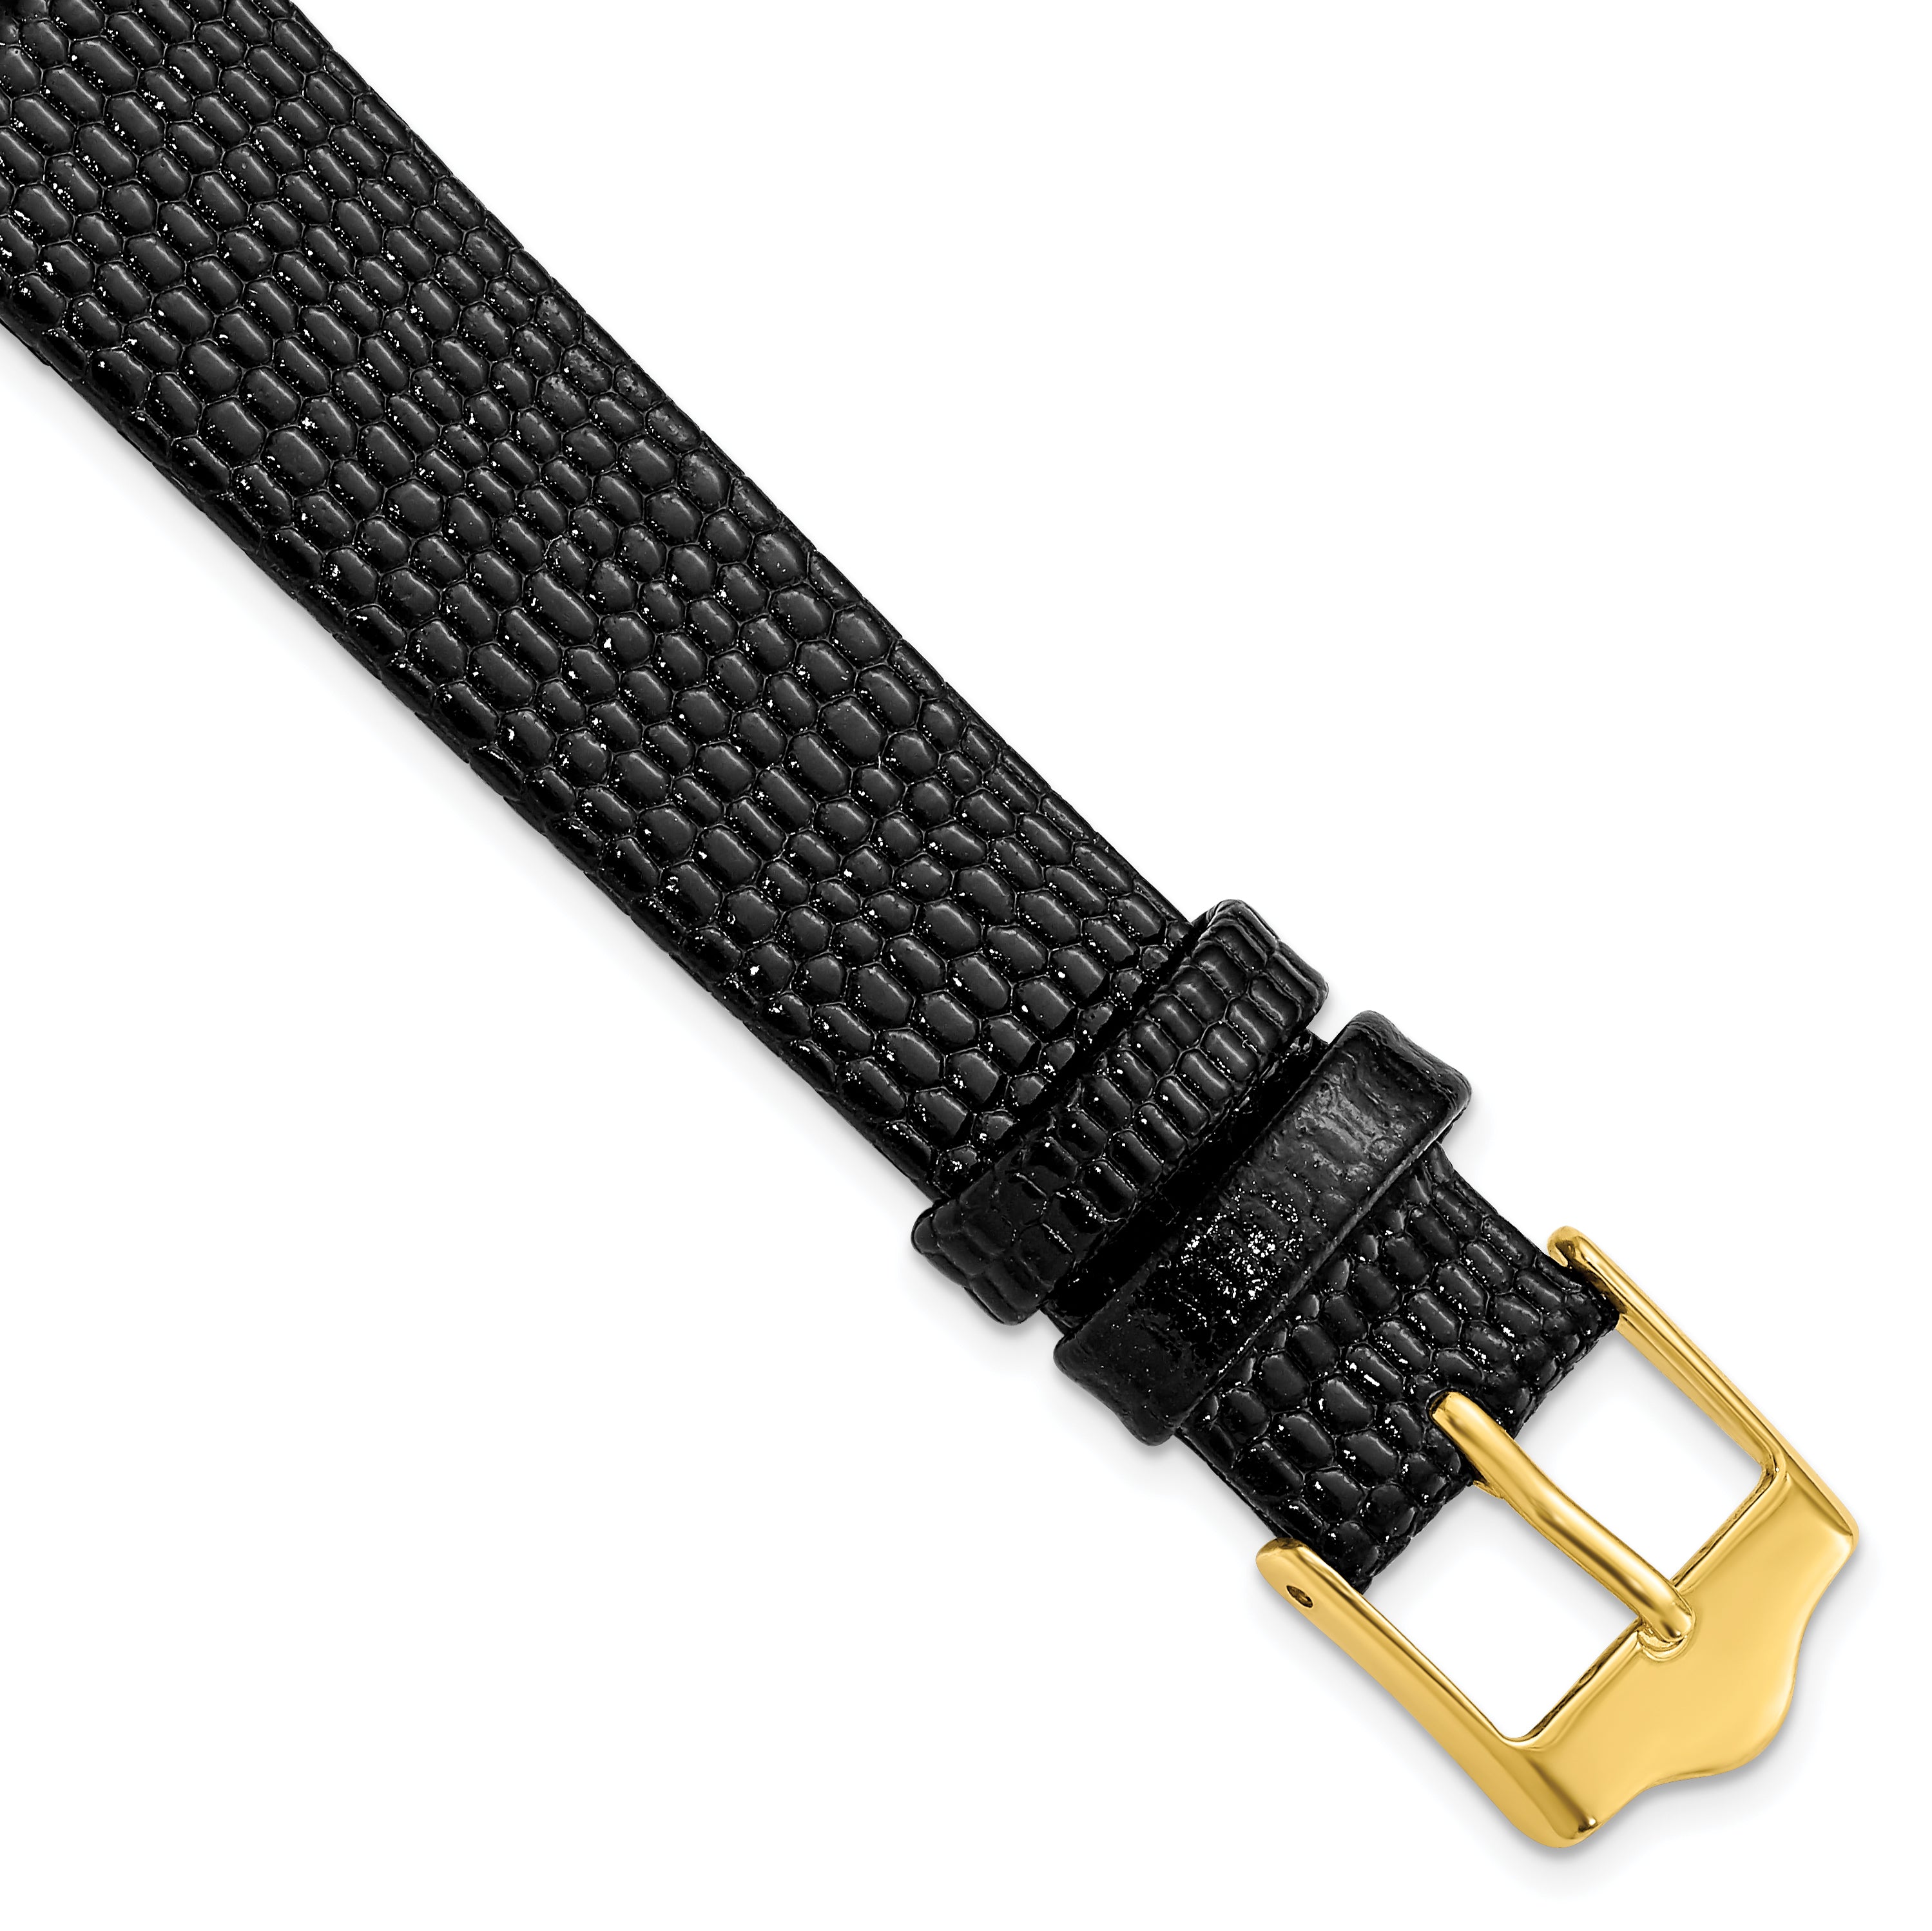 DeBeer 16mm Flat Black Lizard Grain Leather with Gold-tone Buckle 7.5 inch Watch Band